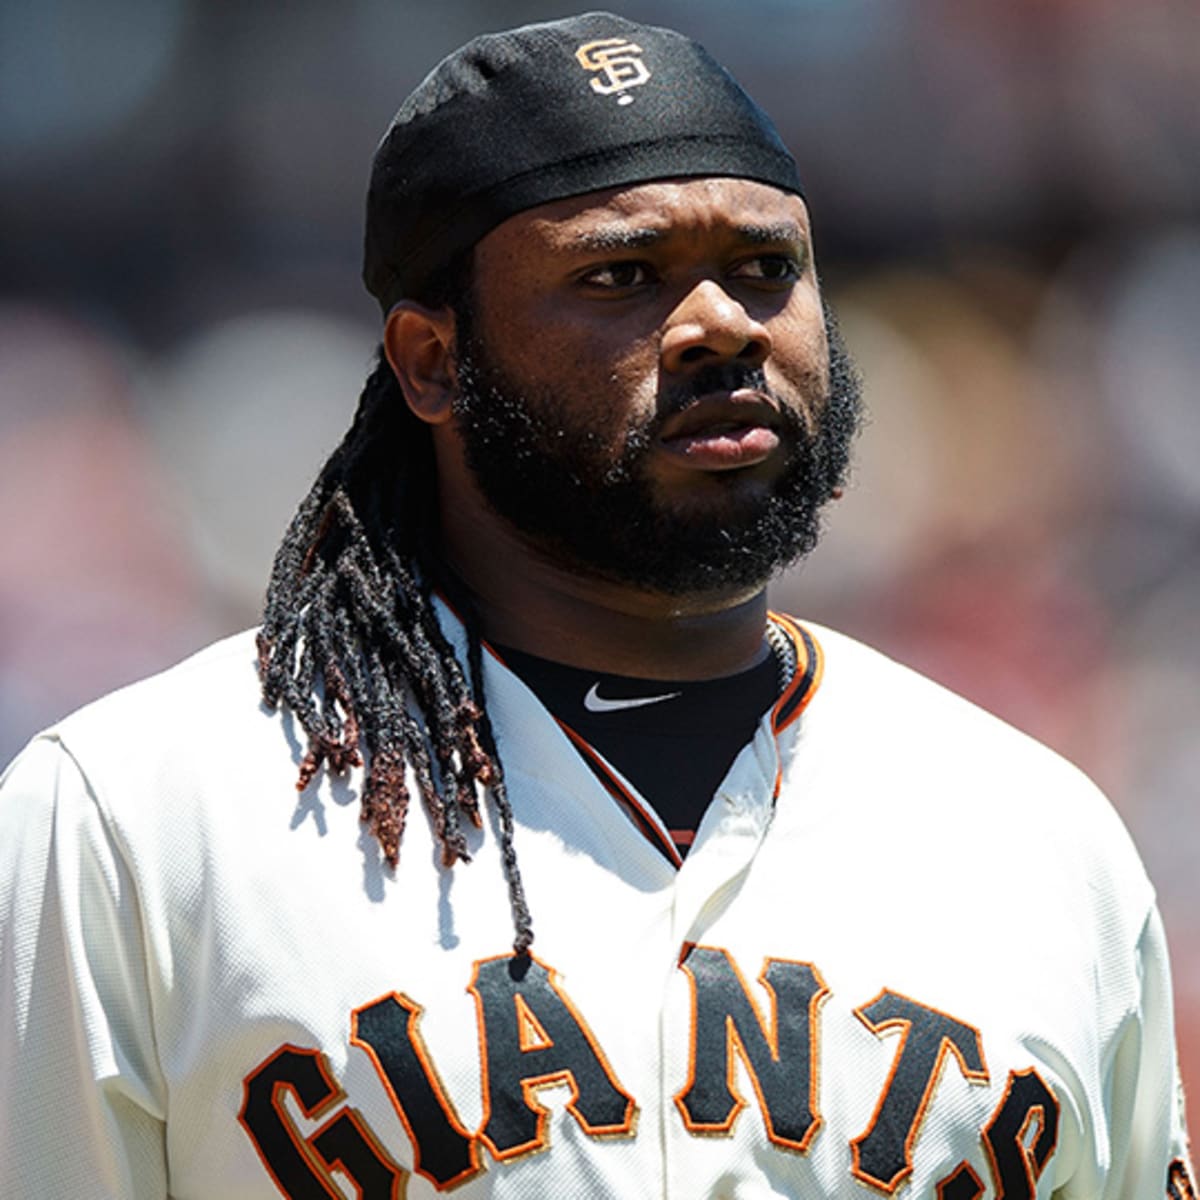 Johnny Cueto posted photo of dead horse on Instagram - Sports Illustrated